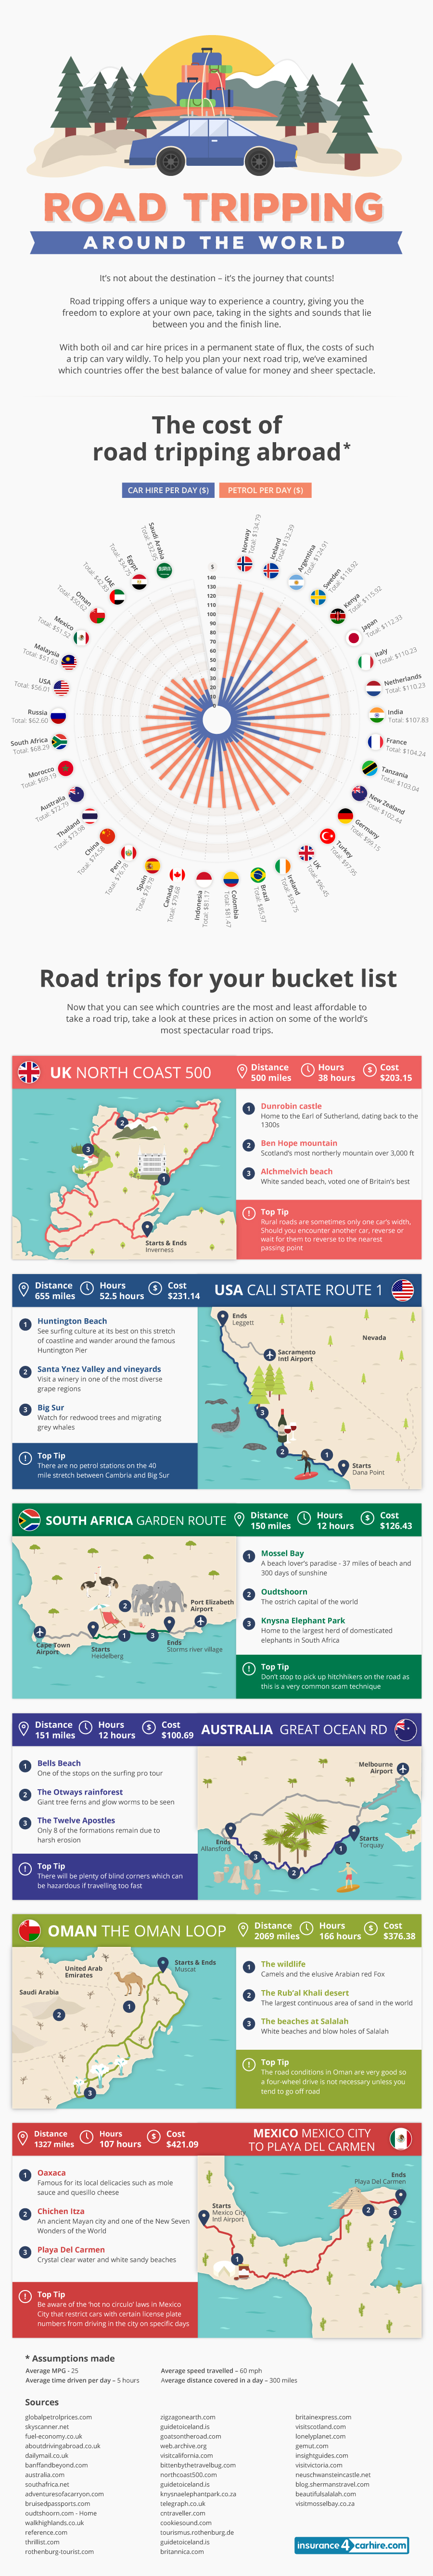 Road Trip affordable countries infographic